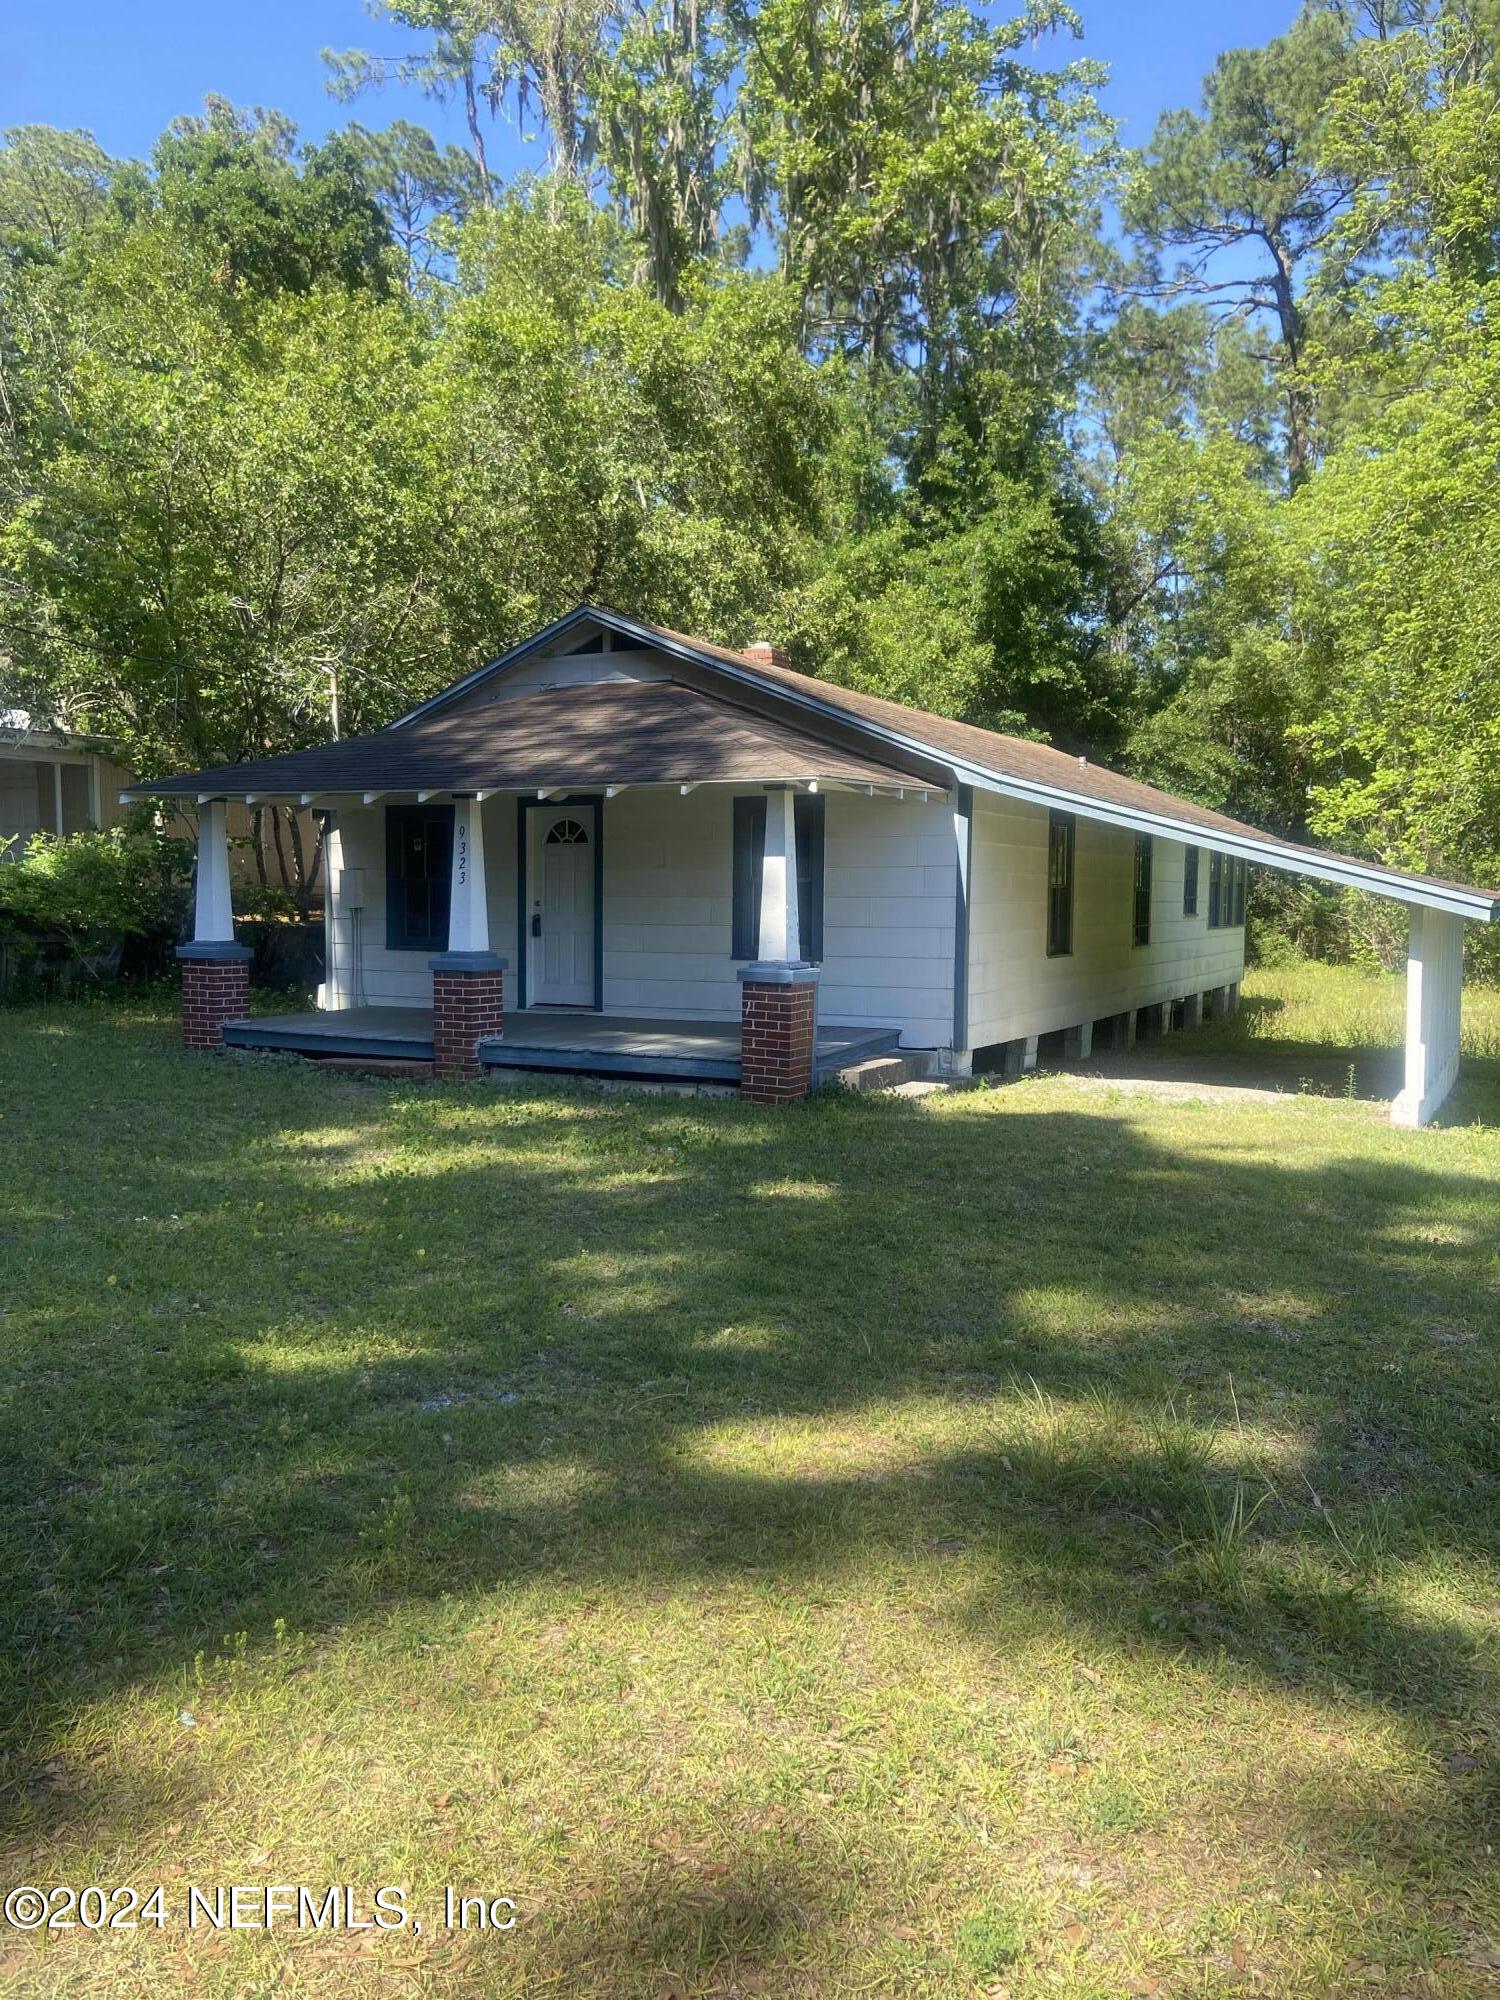 Jacksonville, FL home for sale located at 9323 5th Avenue, Jacksonville, FL 32208